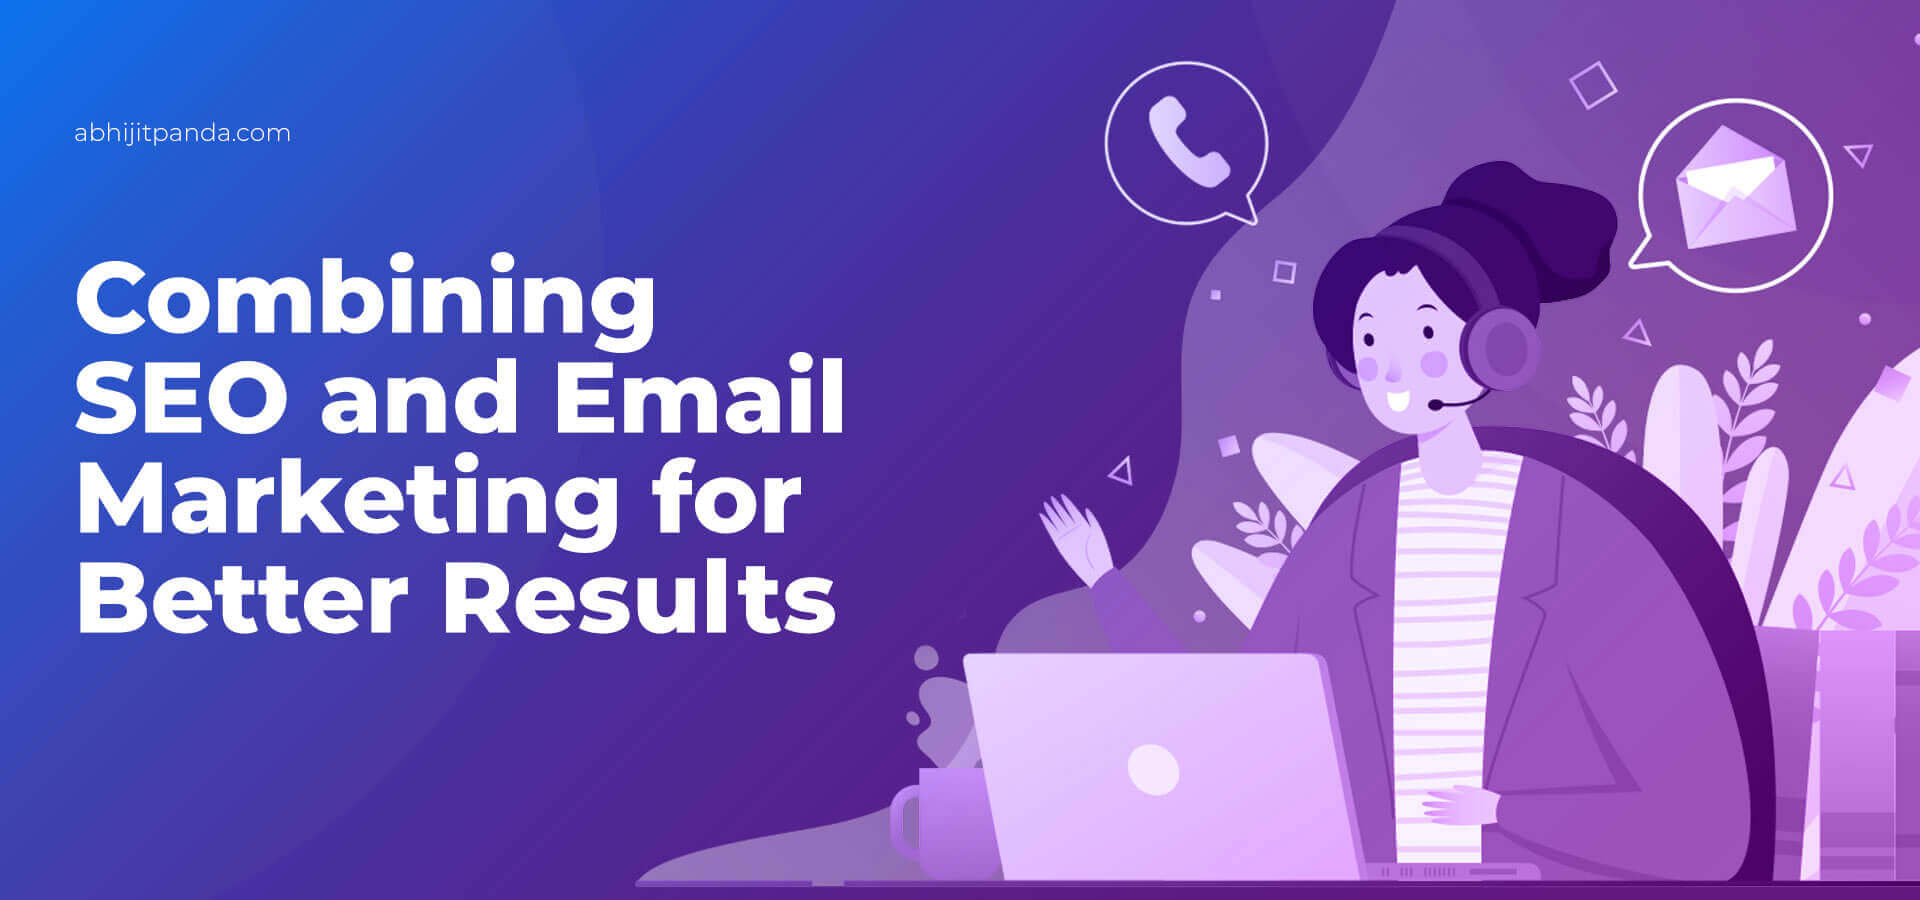 Combining SEO and Email Marketing for Better Results